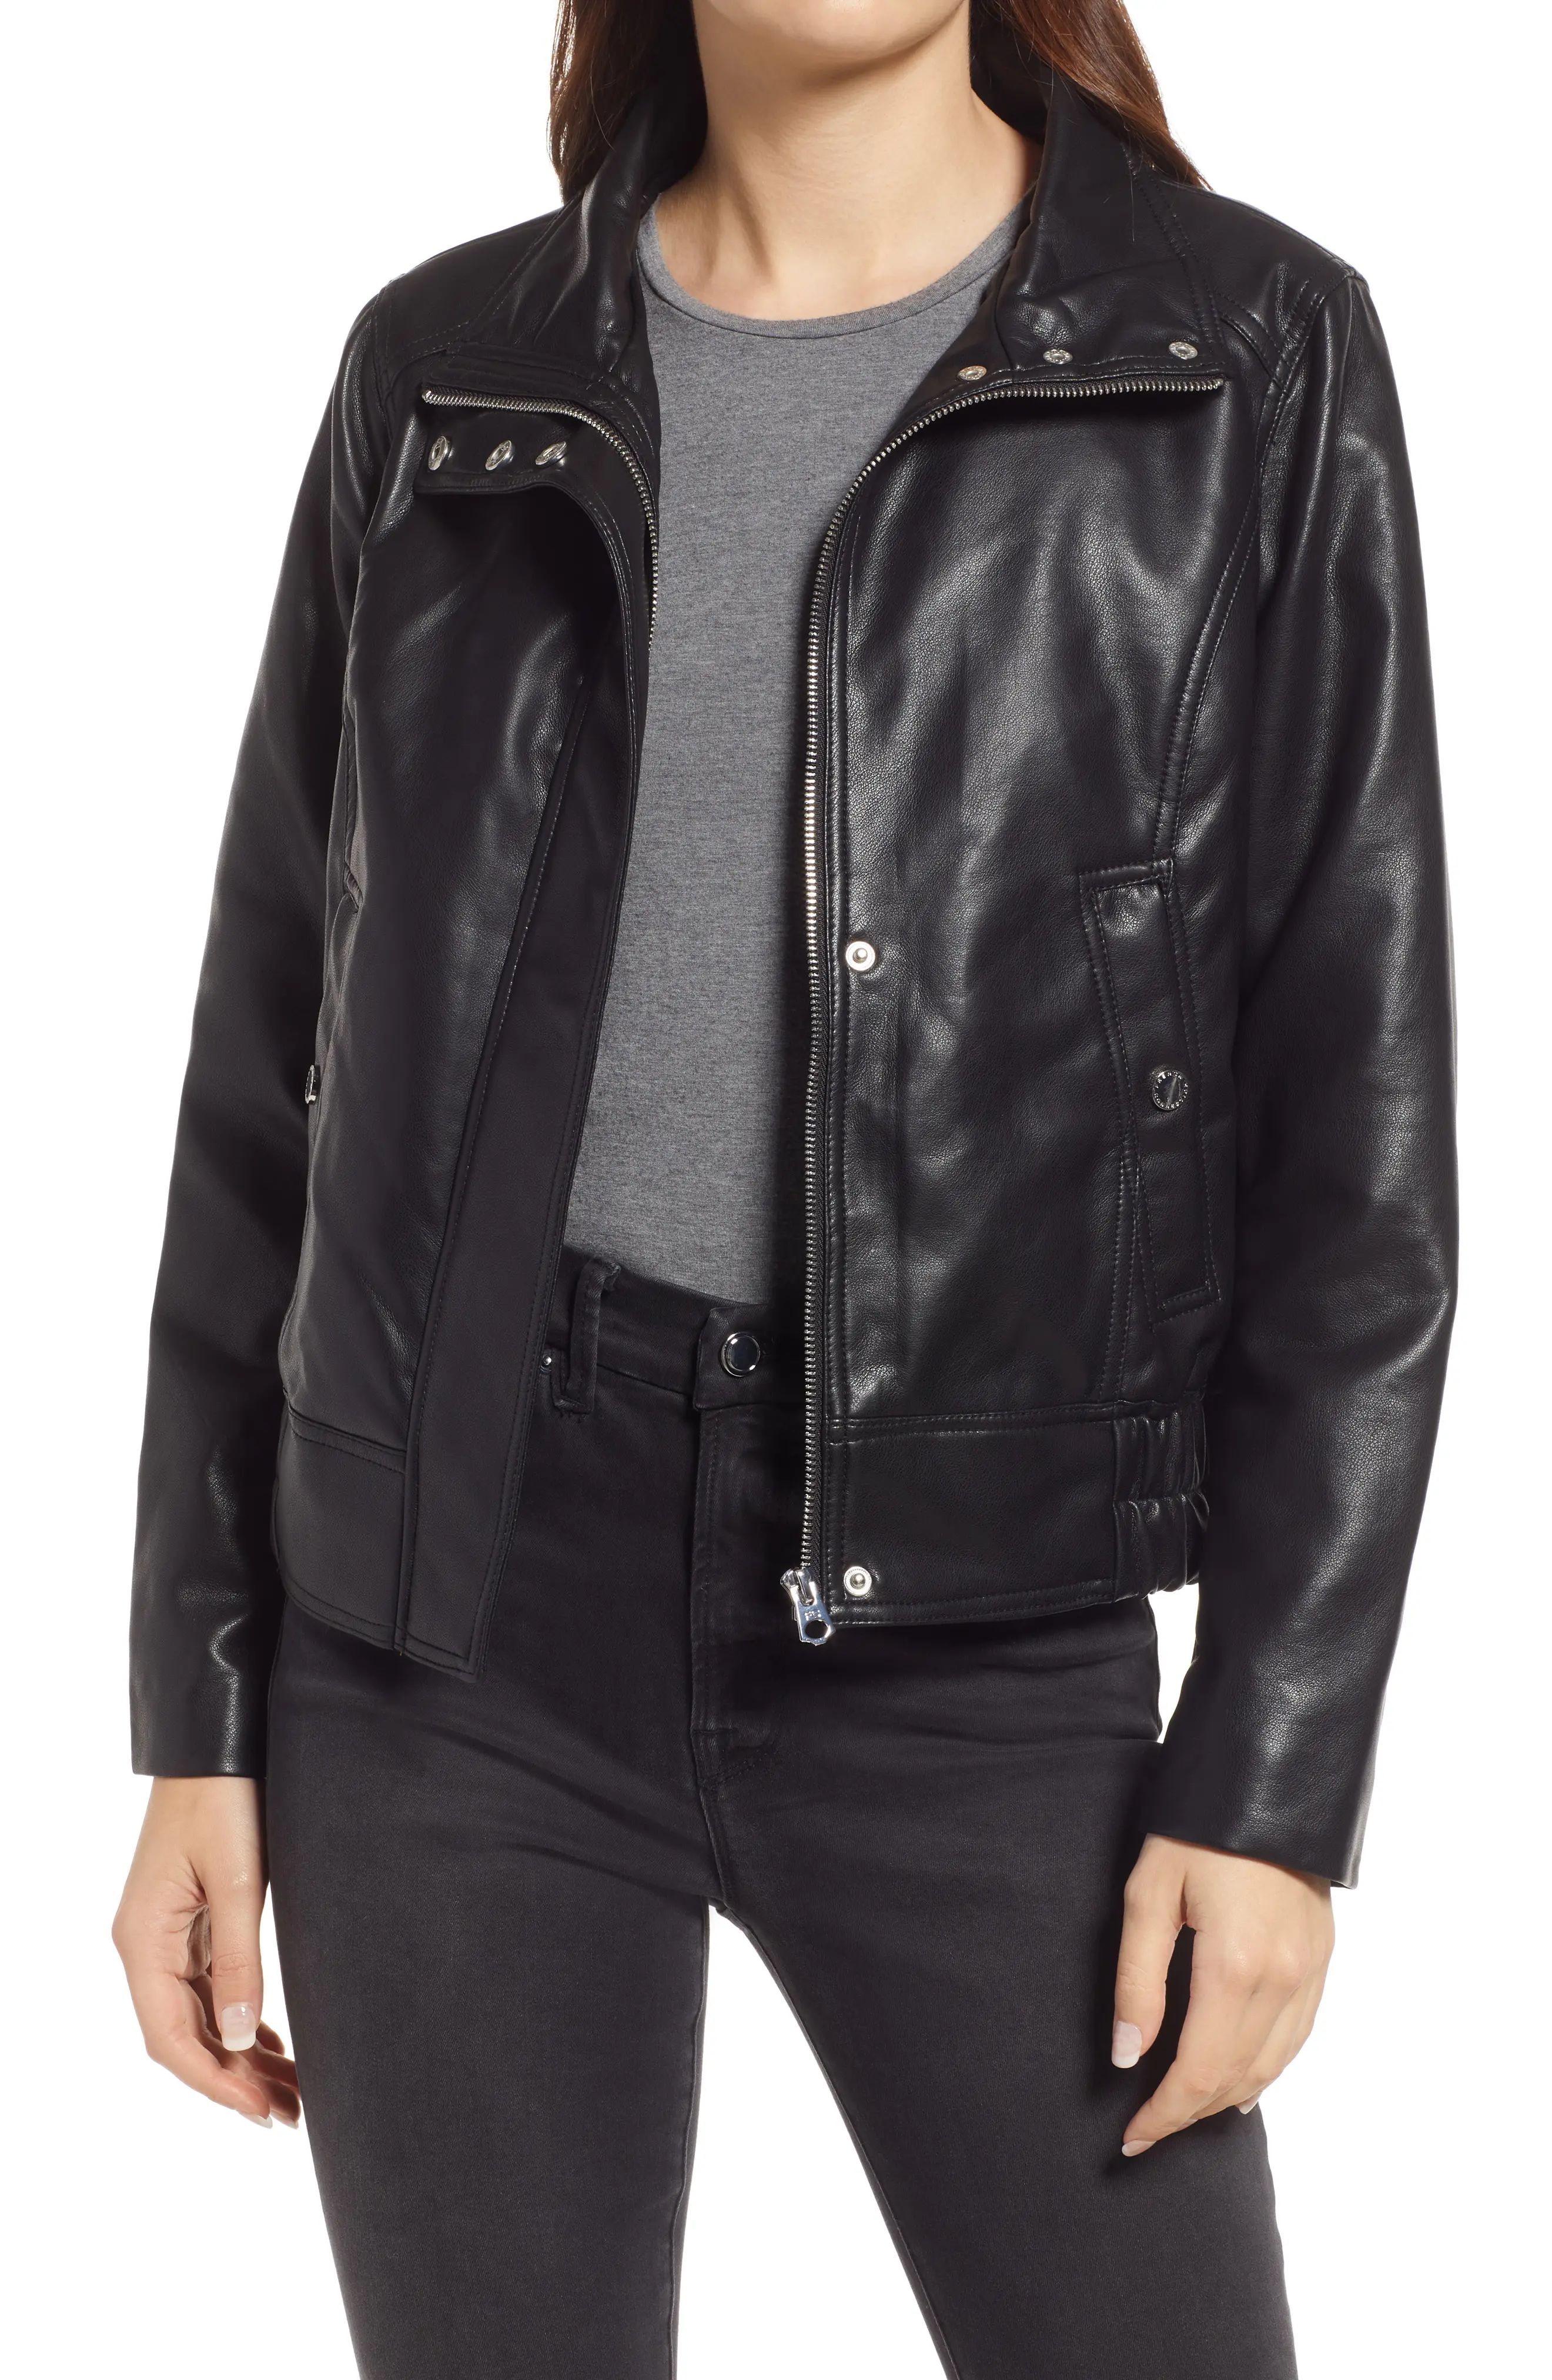 French Connection Faux Leather Jacket, Size Large in Black at Nordstrom | Nordstrom